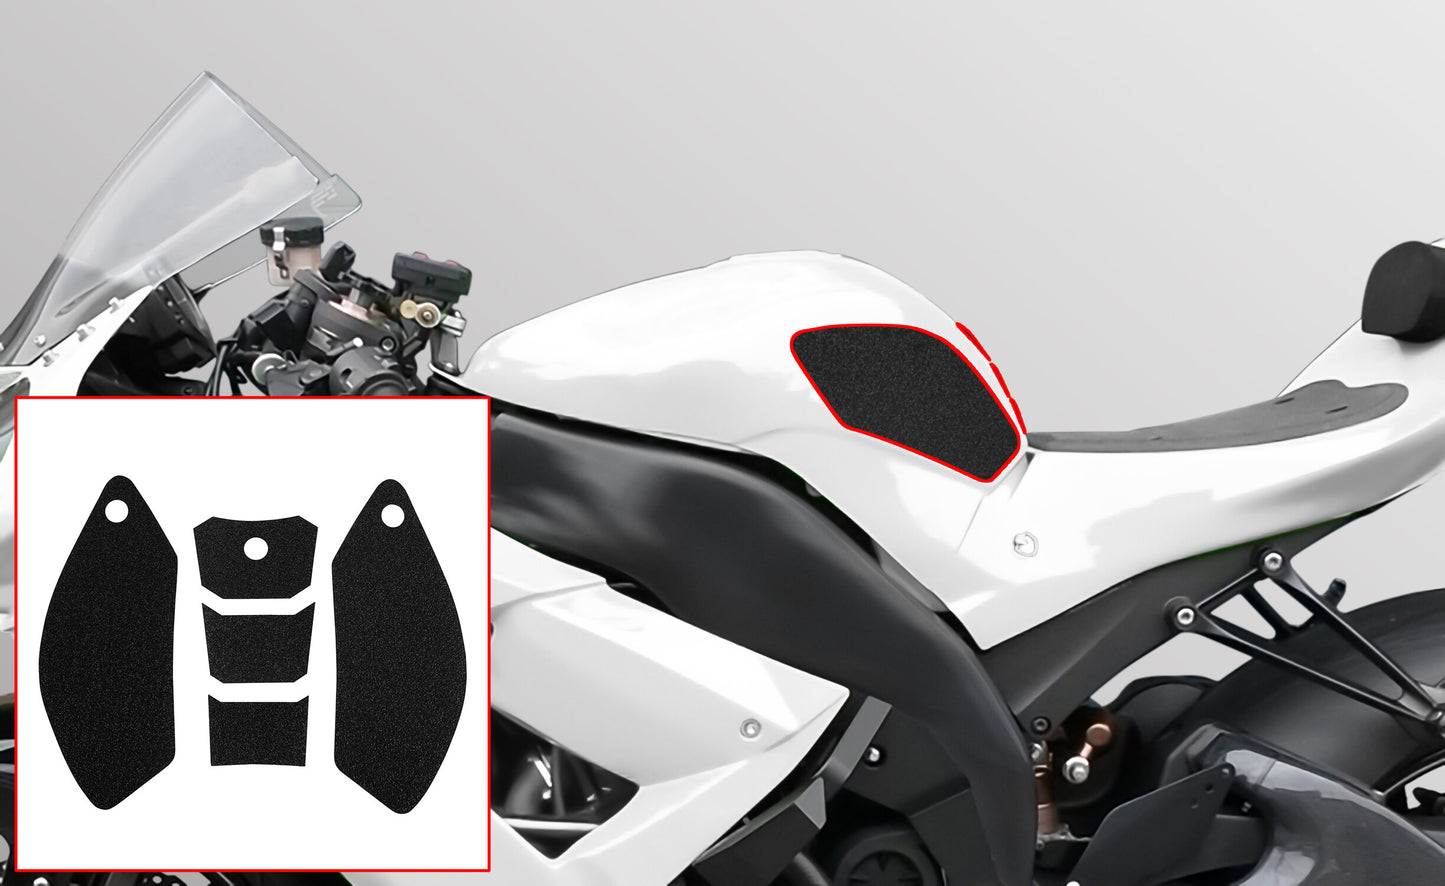 Wolfline Motorcycle Anti Slip Tank Pad Stickers Side Gas Tank Pad Knee Grip Decals Protection For Kawasaki ZX10R ZX 10R ZX10 R 2009 2010